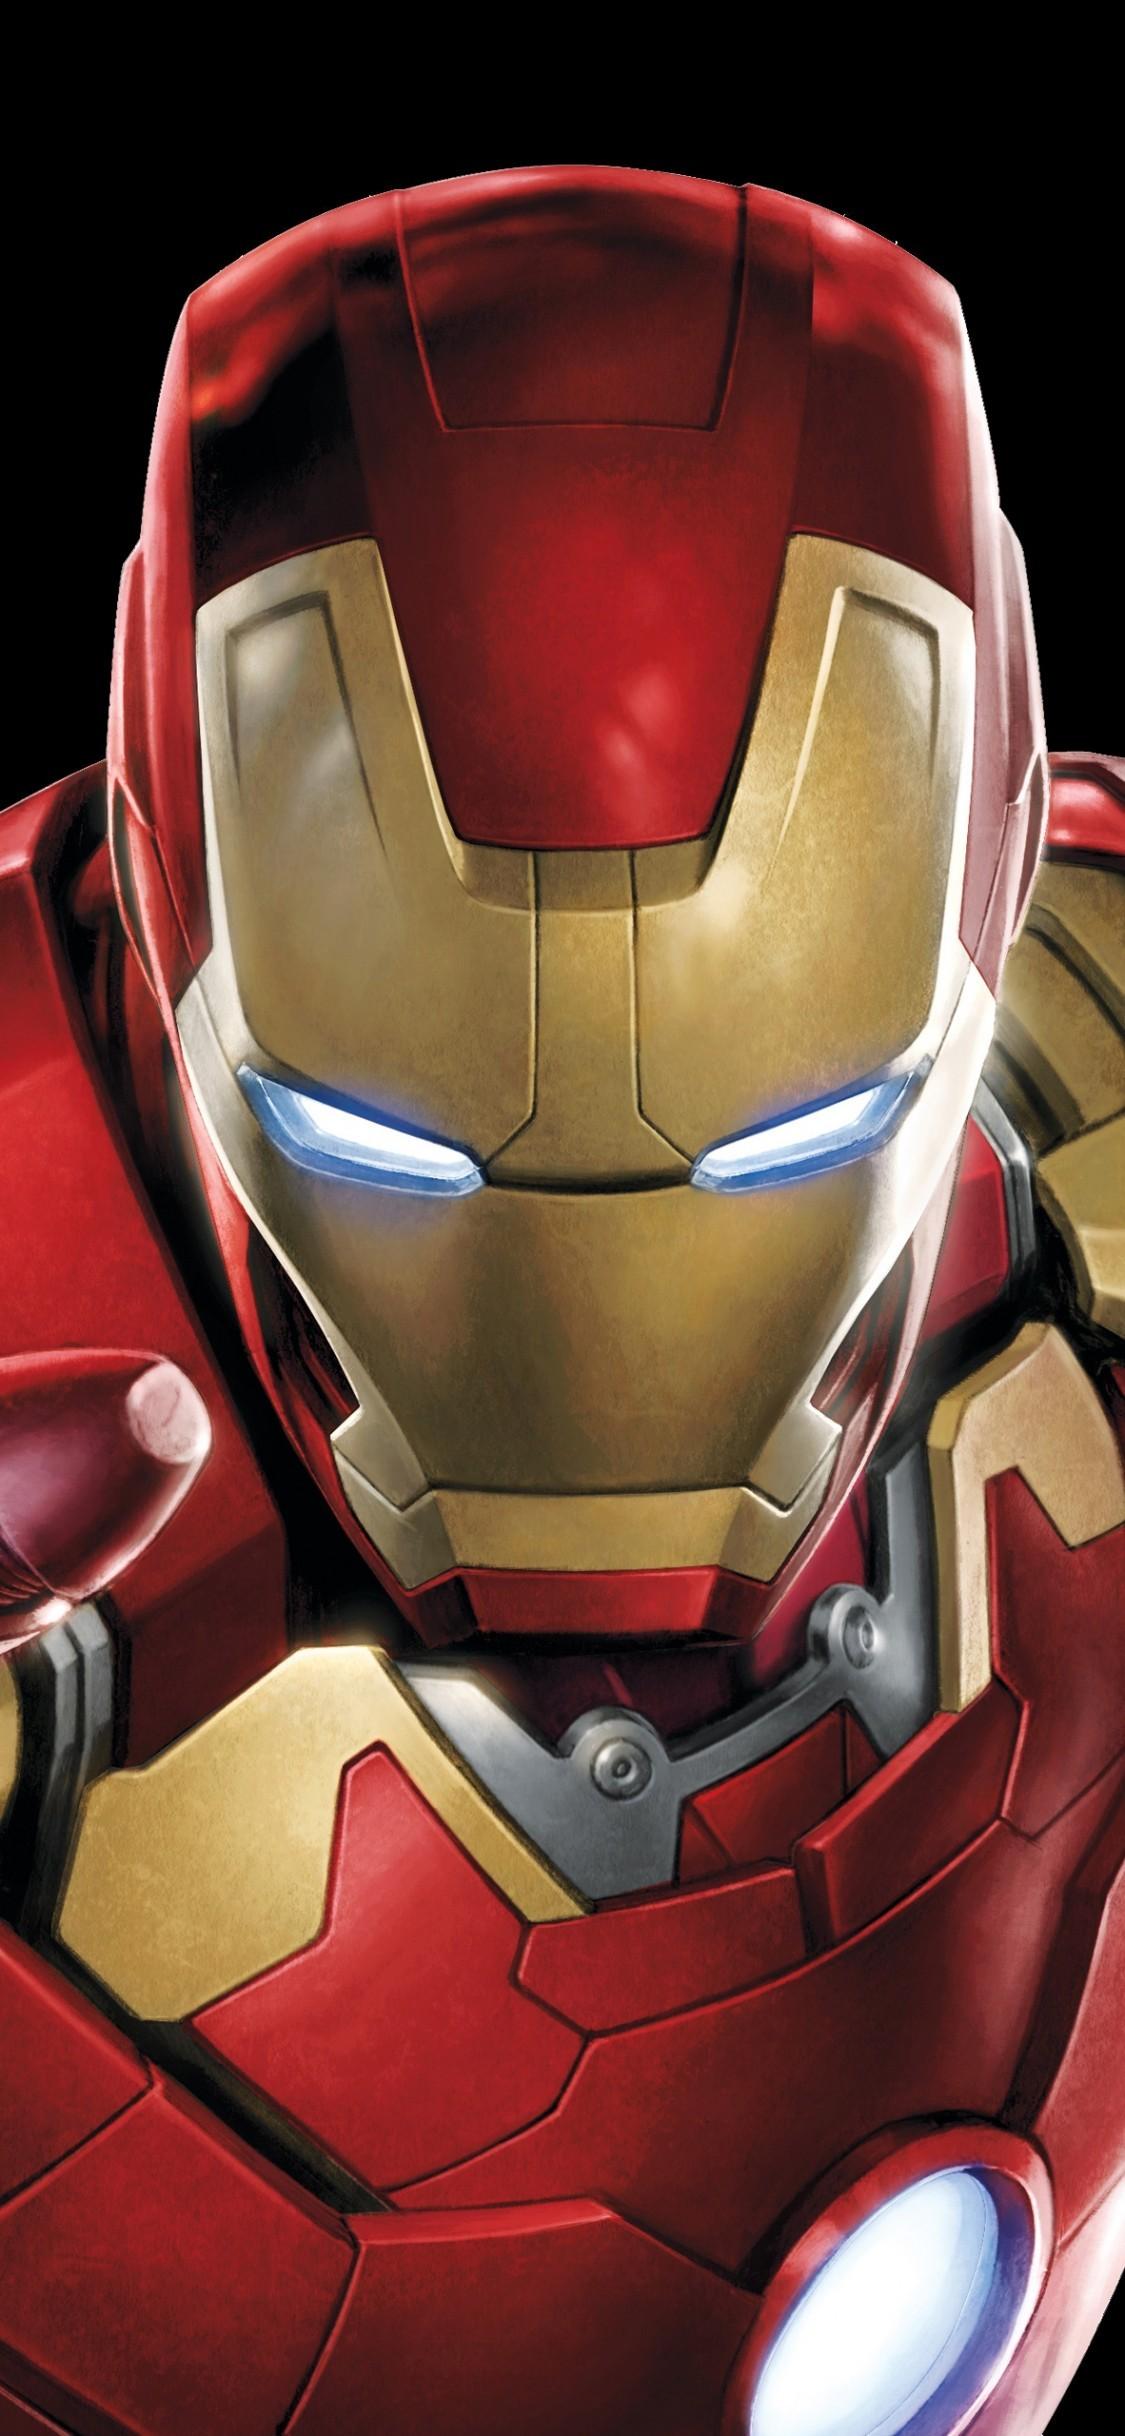 Download 1125x2436 Iron Man, Armor Wallpaper for iPhone X